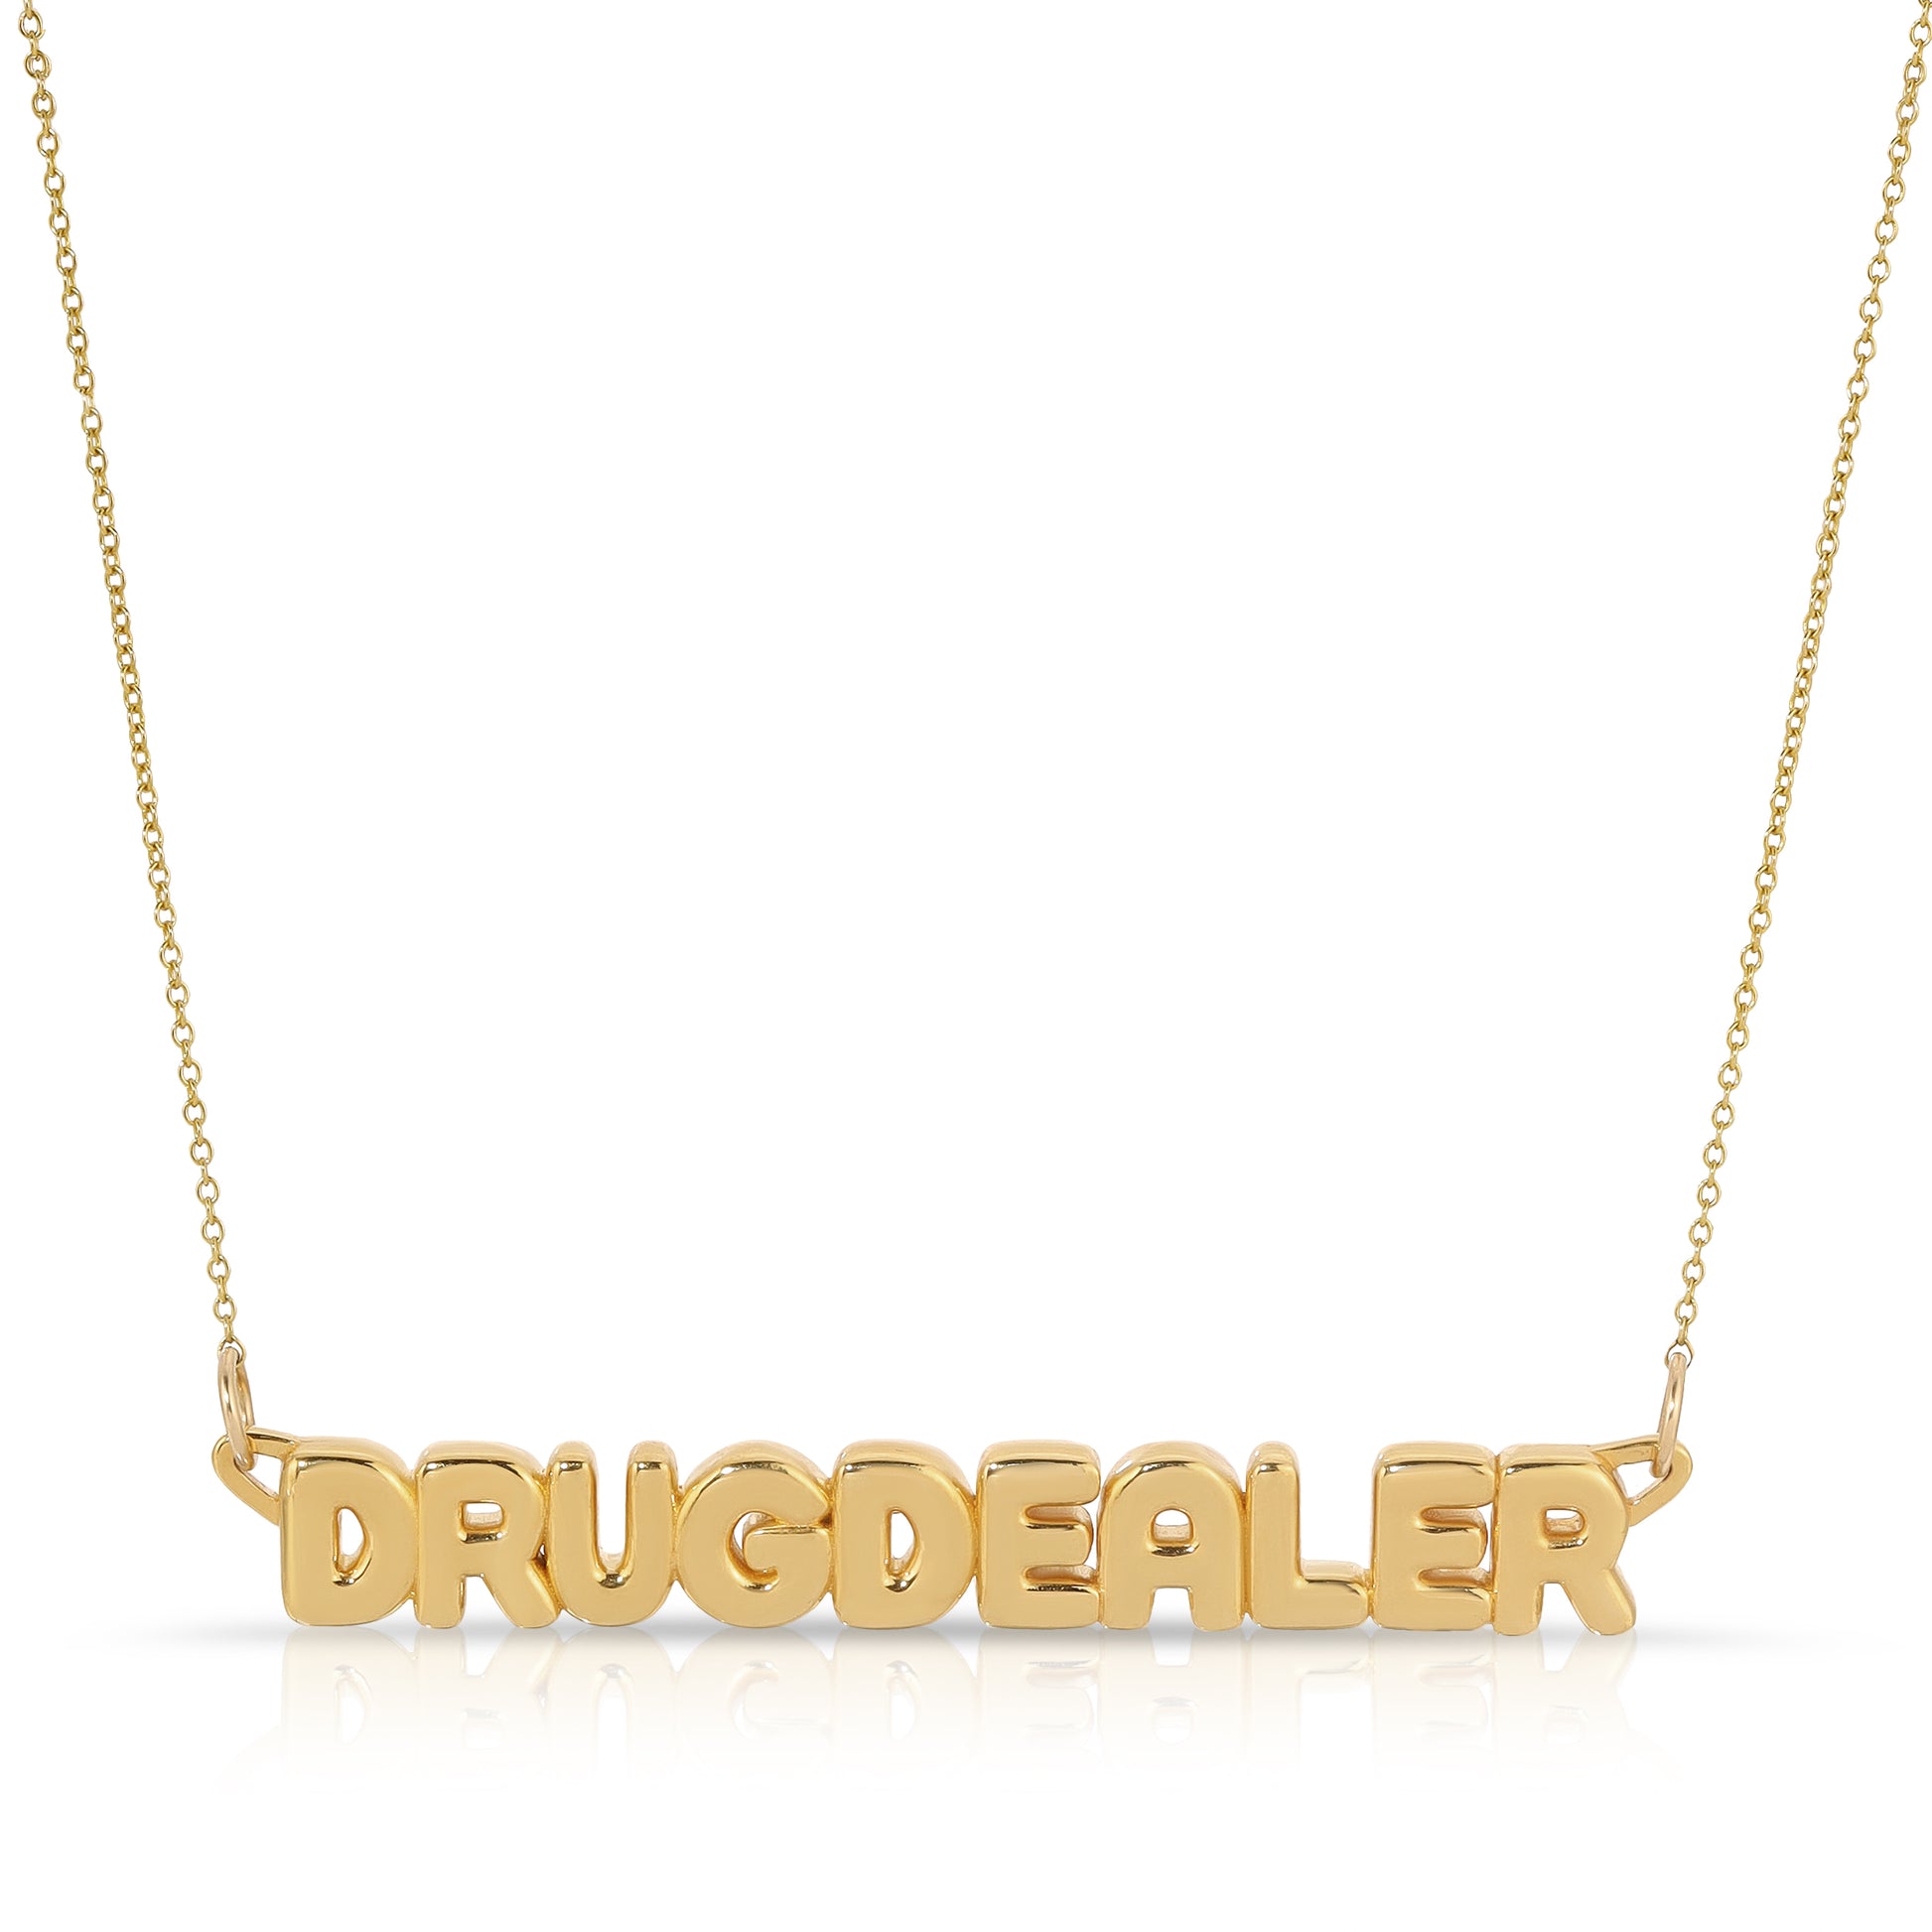 gold Drug dealer bubble letter nameplate necklace from the wandering jewel